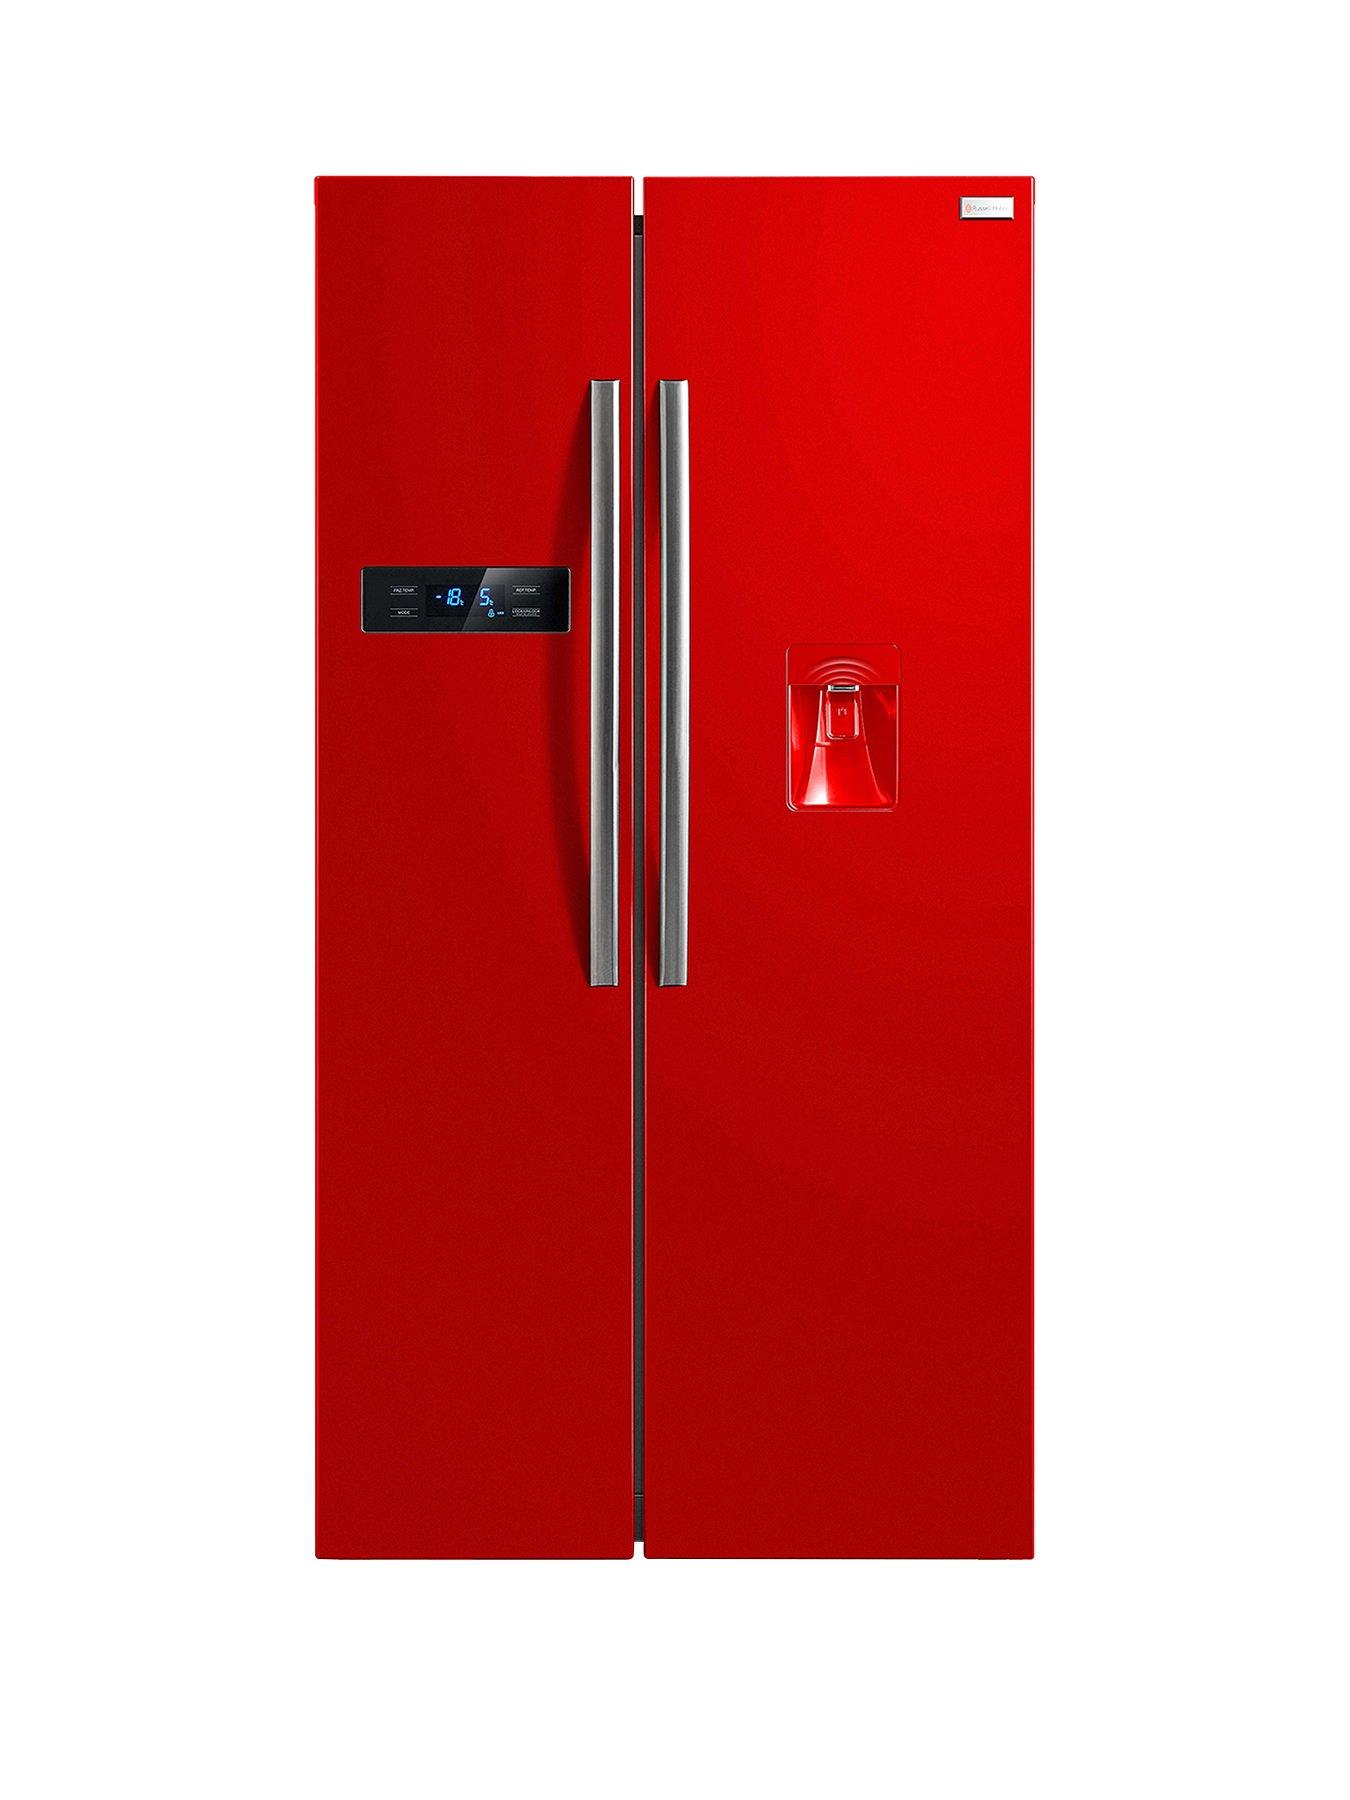 Russell Hobbs Rh90Ff176R-Wd American Style Fridge Freezer With Free Extended Guarantee*